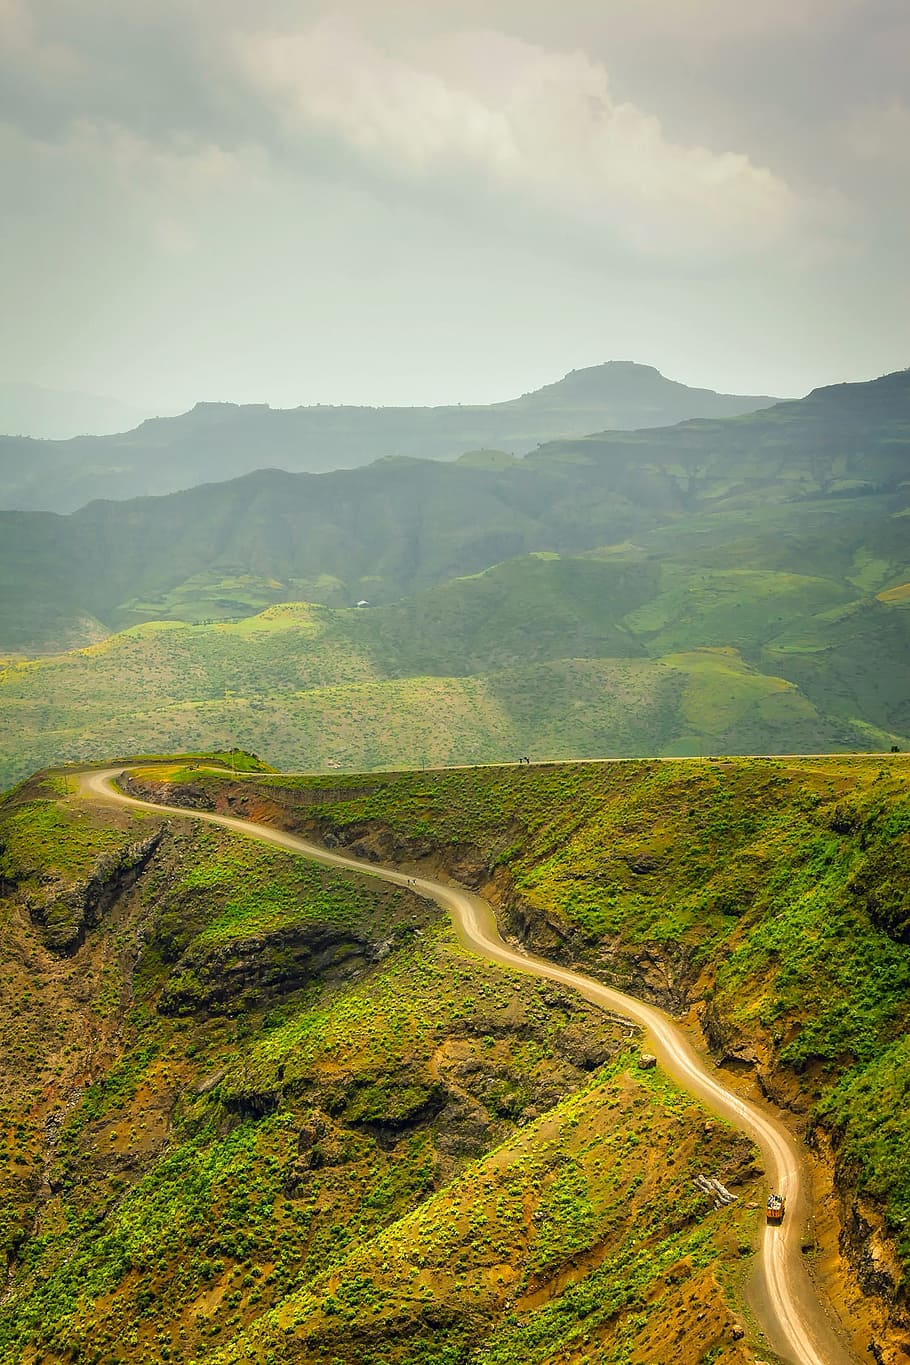 Ethiopia, Mountains, Road, Valley, Sky, clouds, landscape, scenic, nature, outdoors